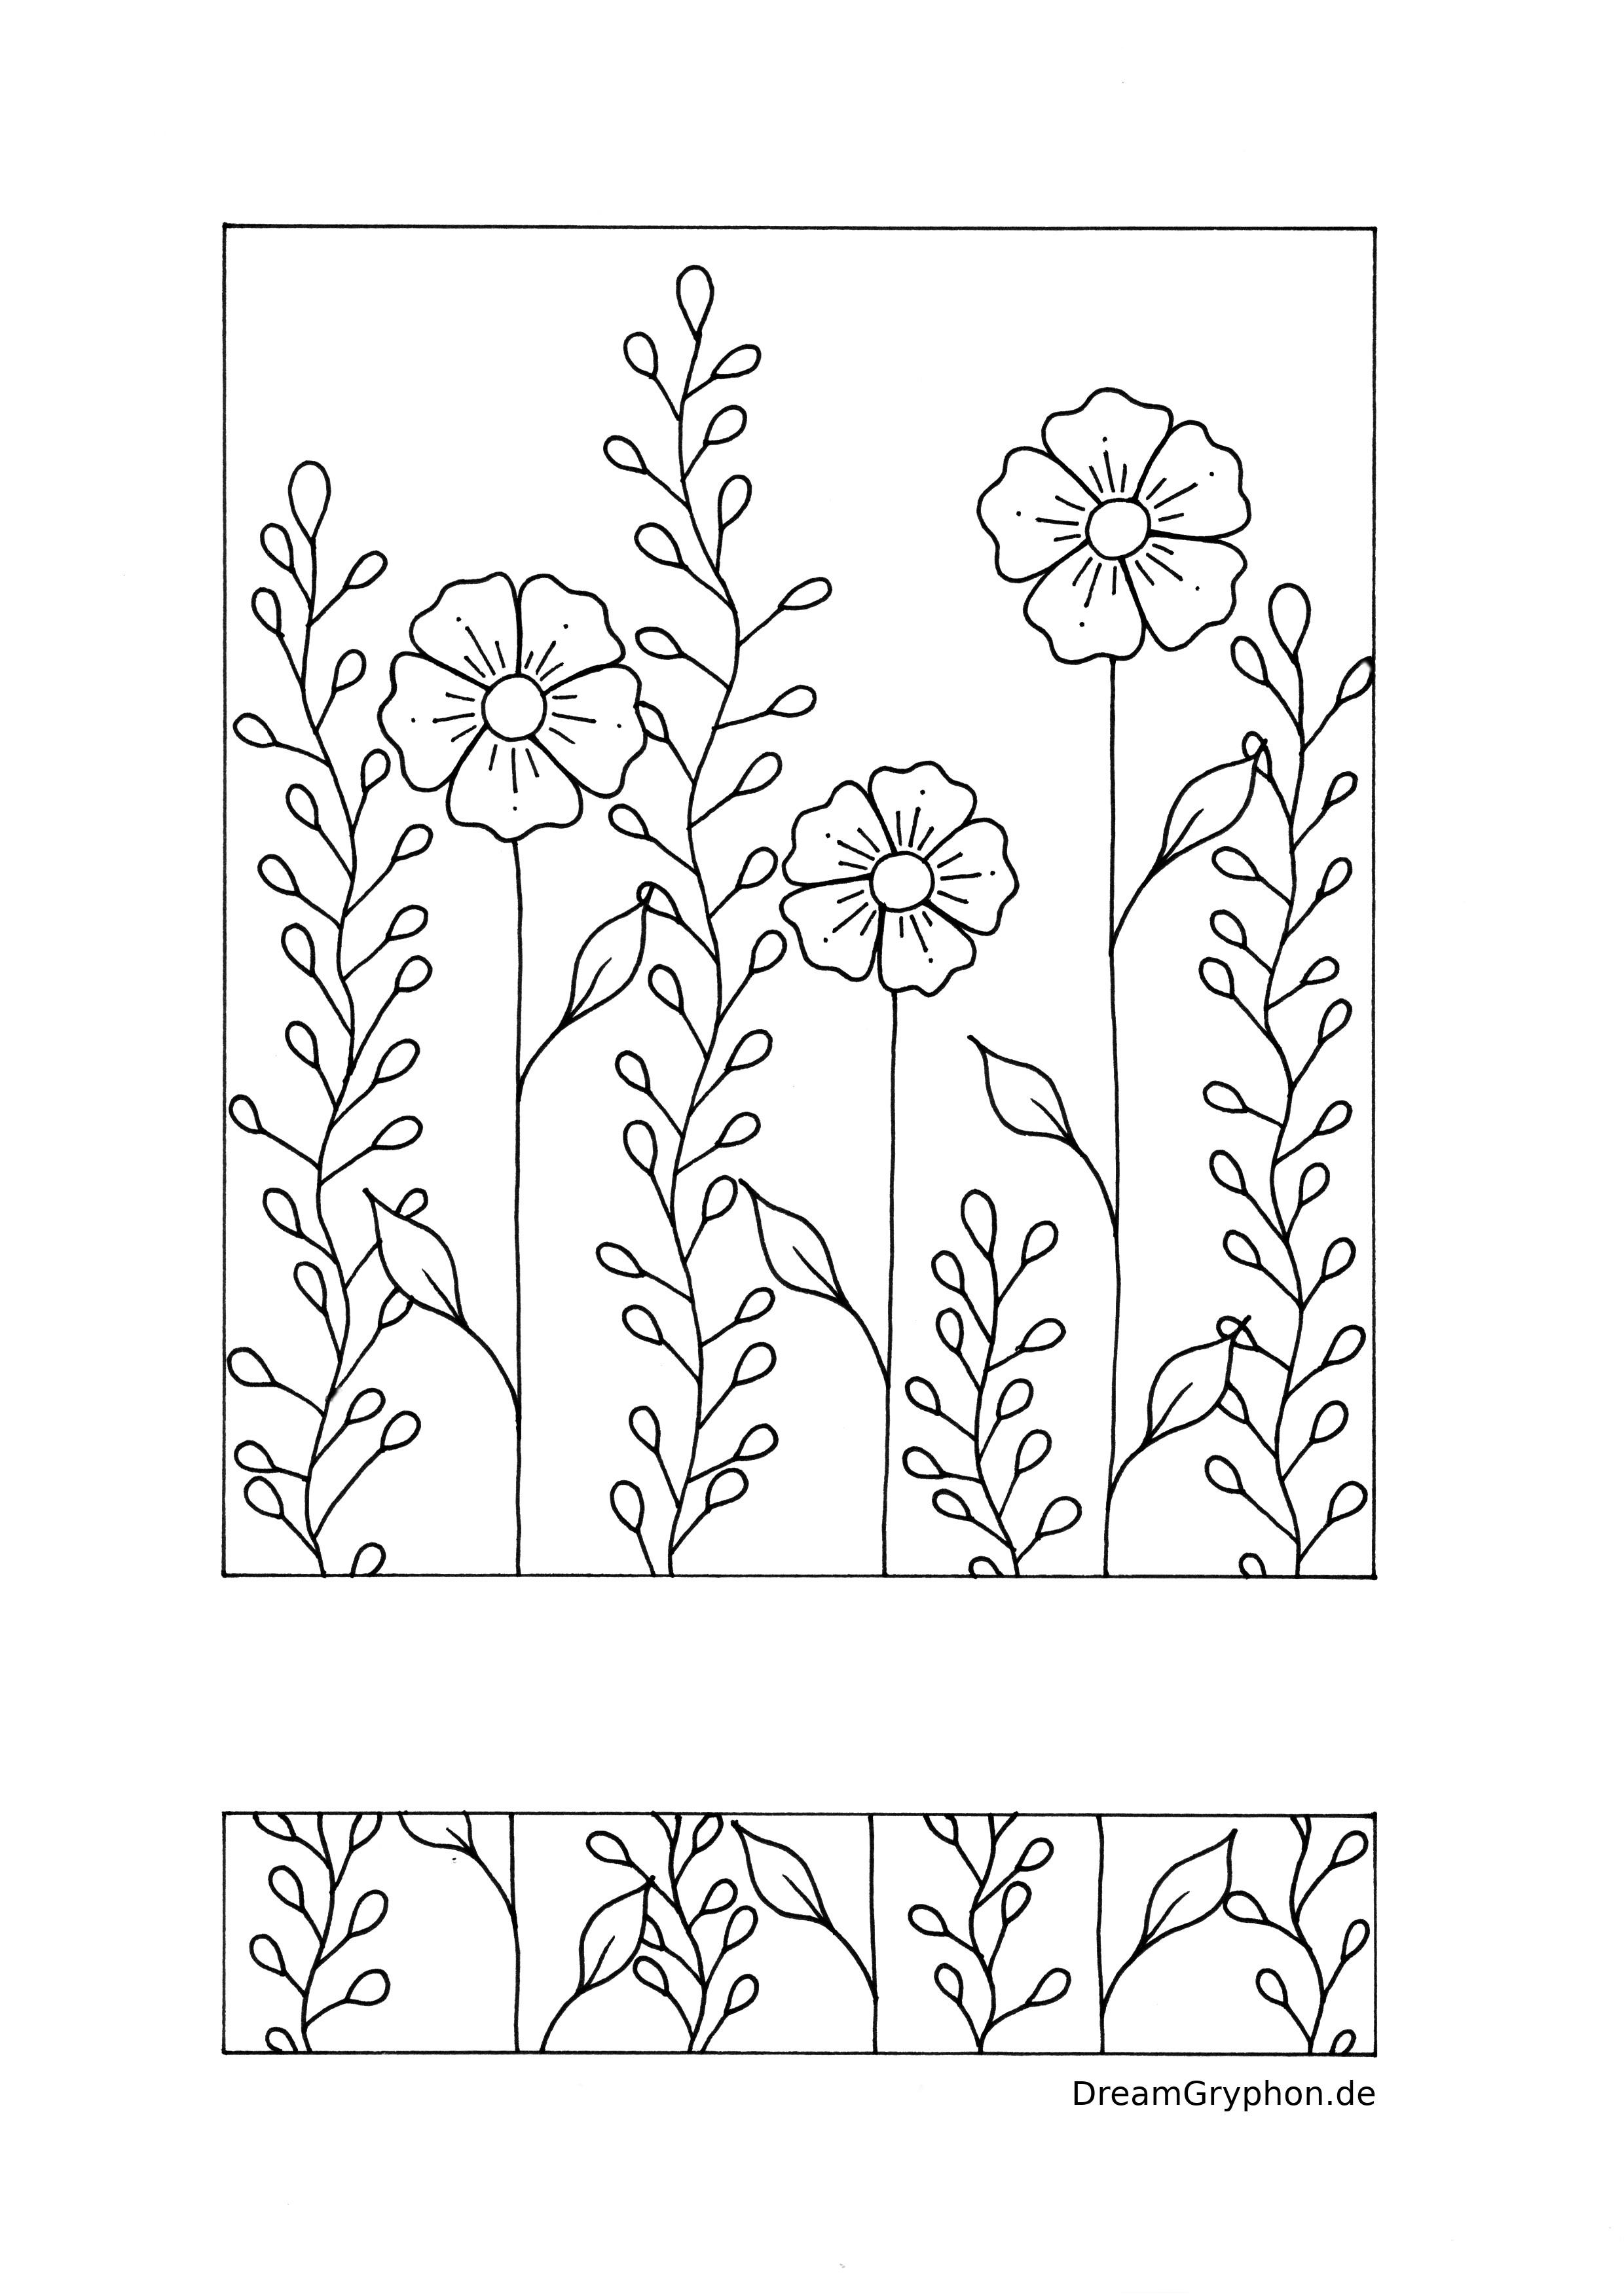 Coloring Page: Flowers and leaves